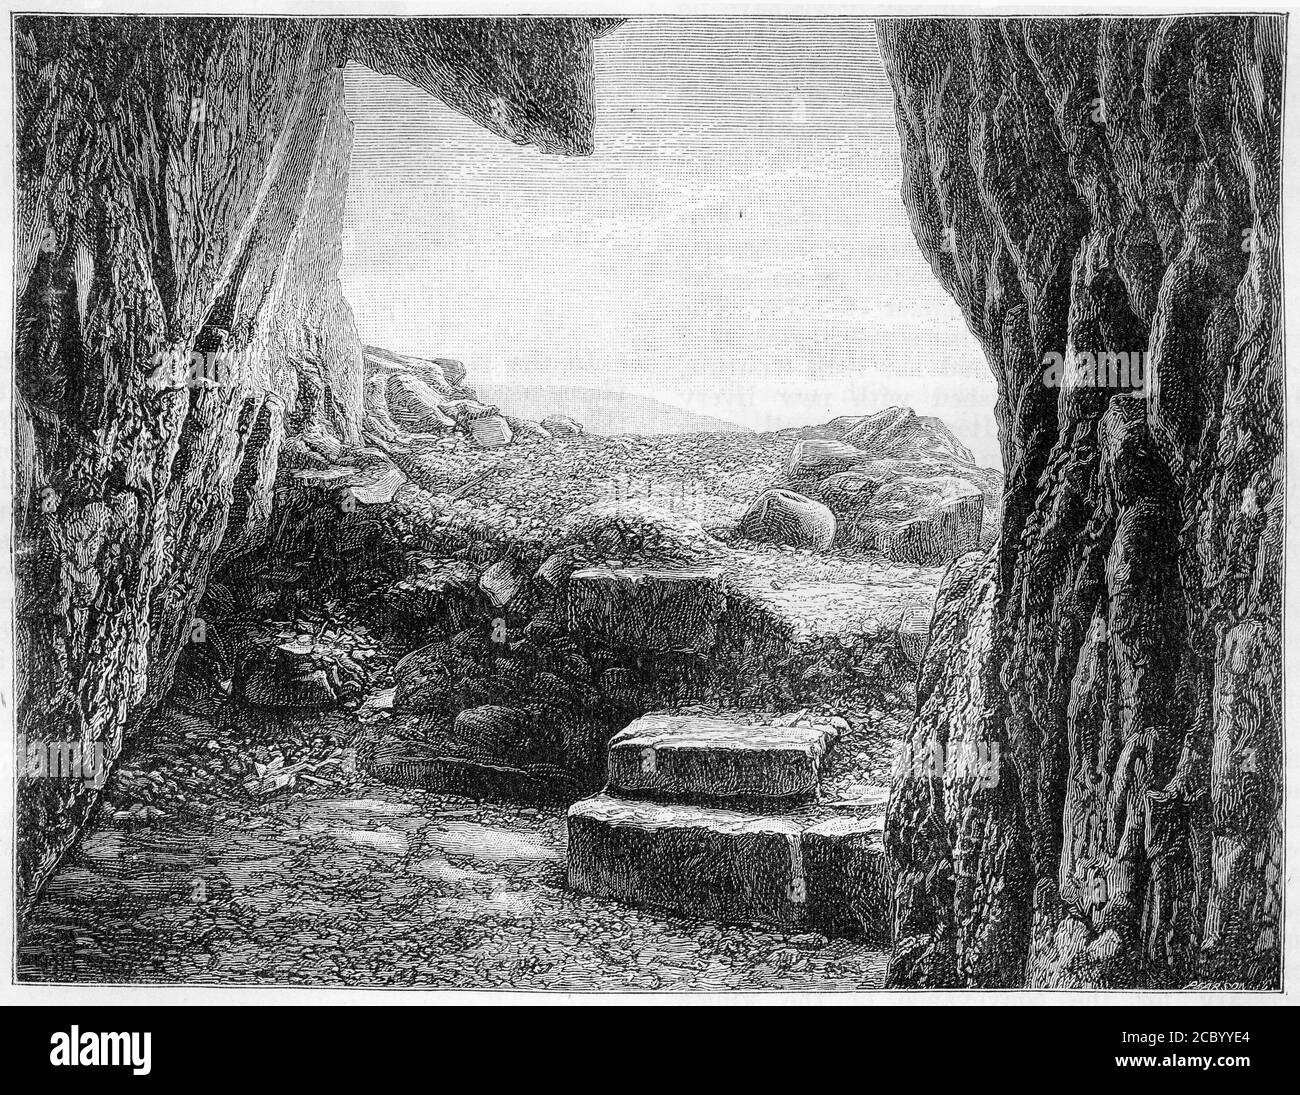 Engraving of St. Ninian's Cave, Glasserton, Wigtownshire, Scotland, which was excavated by Sir Herbert Maxwell. Ninian is first mentioned in the 8th century as a missionary among the Pictish peoples of what is now Scotland, and he is known as the Apostle to the Southern Picts. Stock Photo